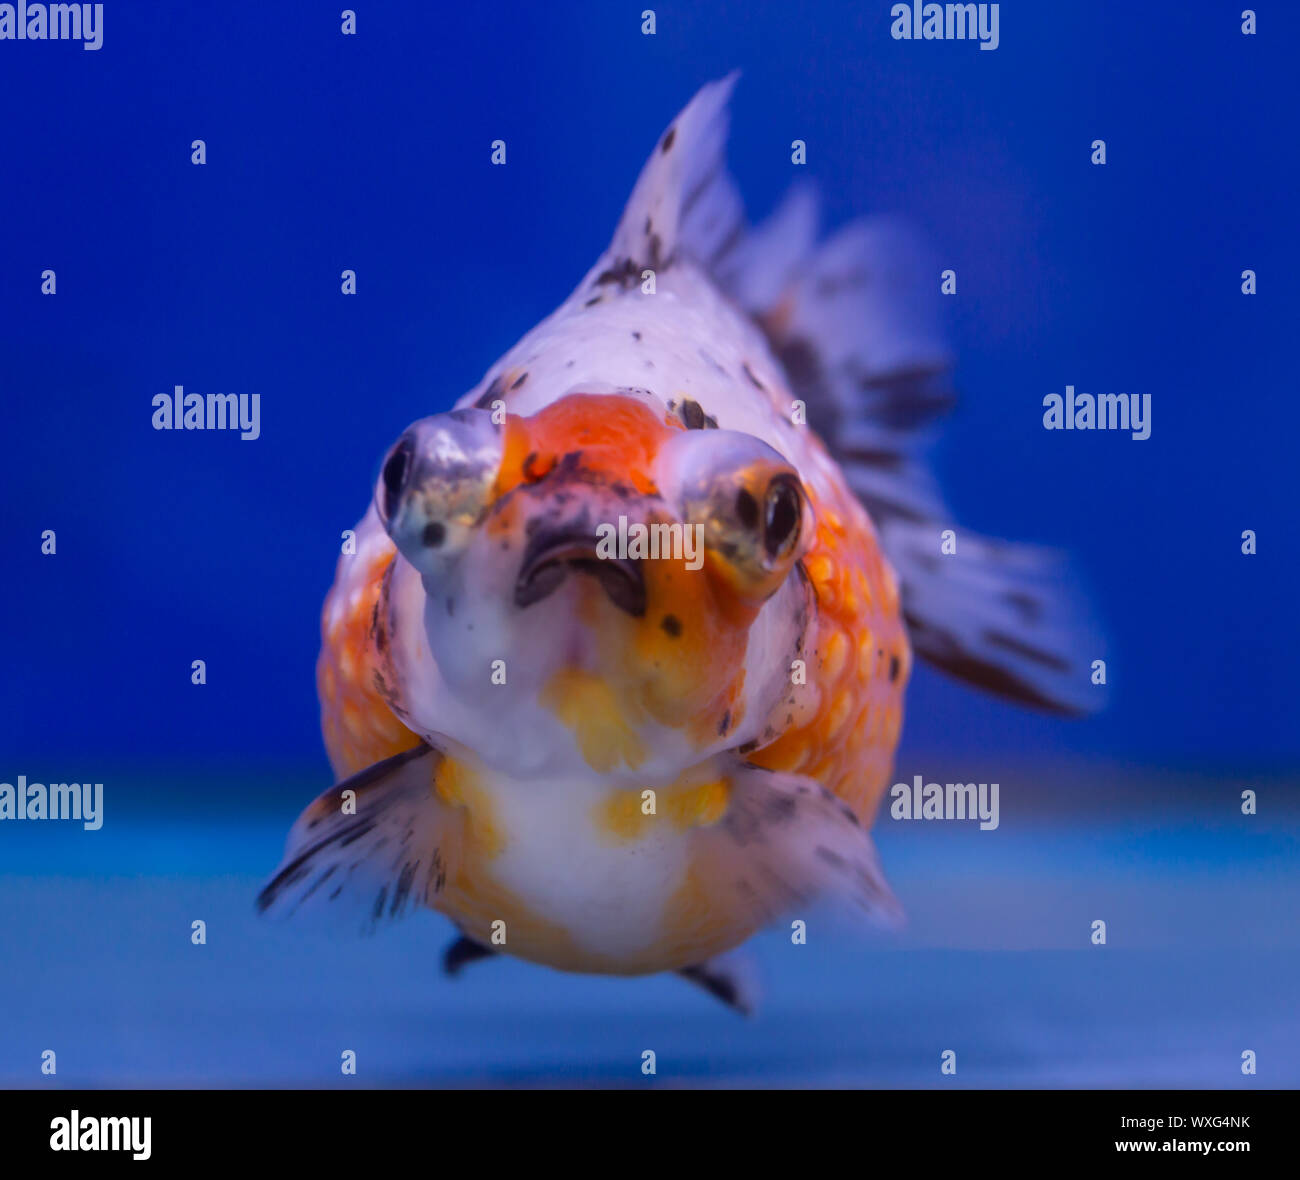 Calico pearl scale fish on blue background Stock Photo